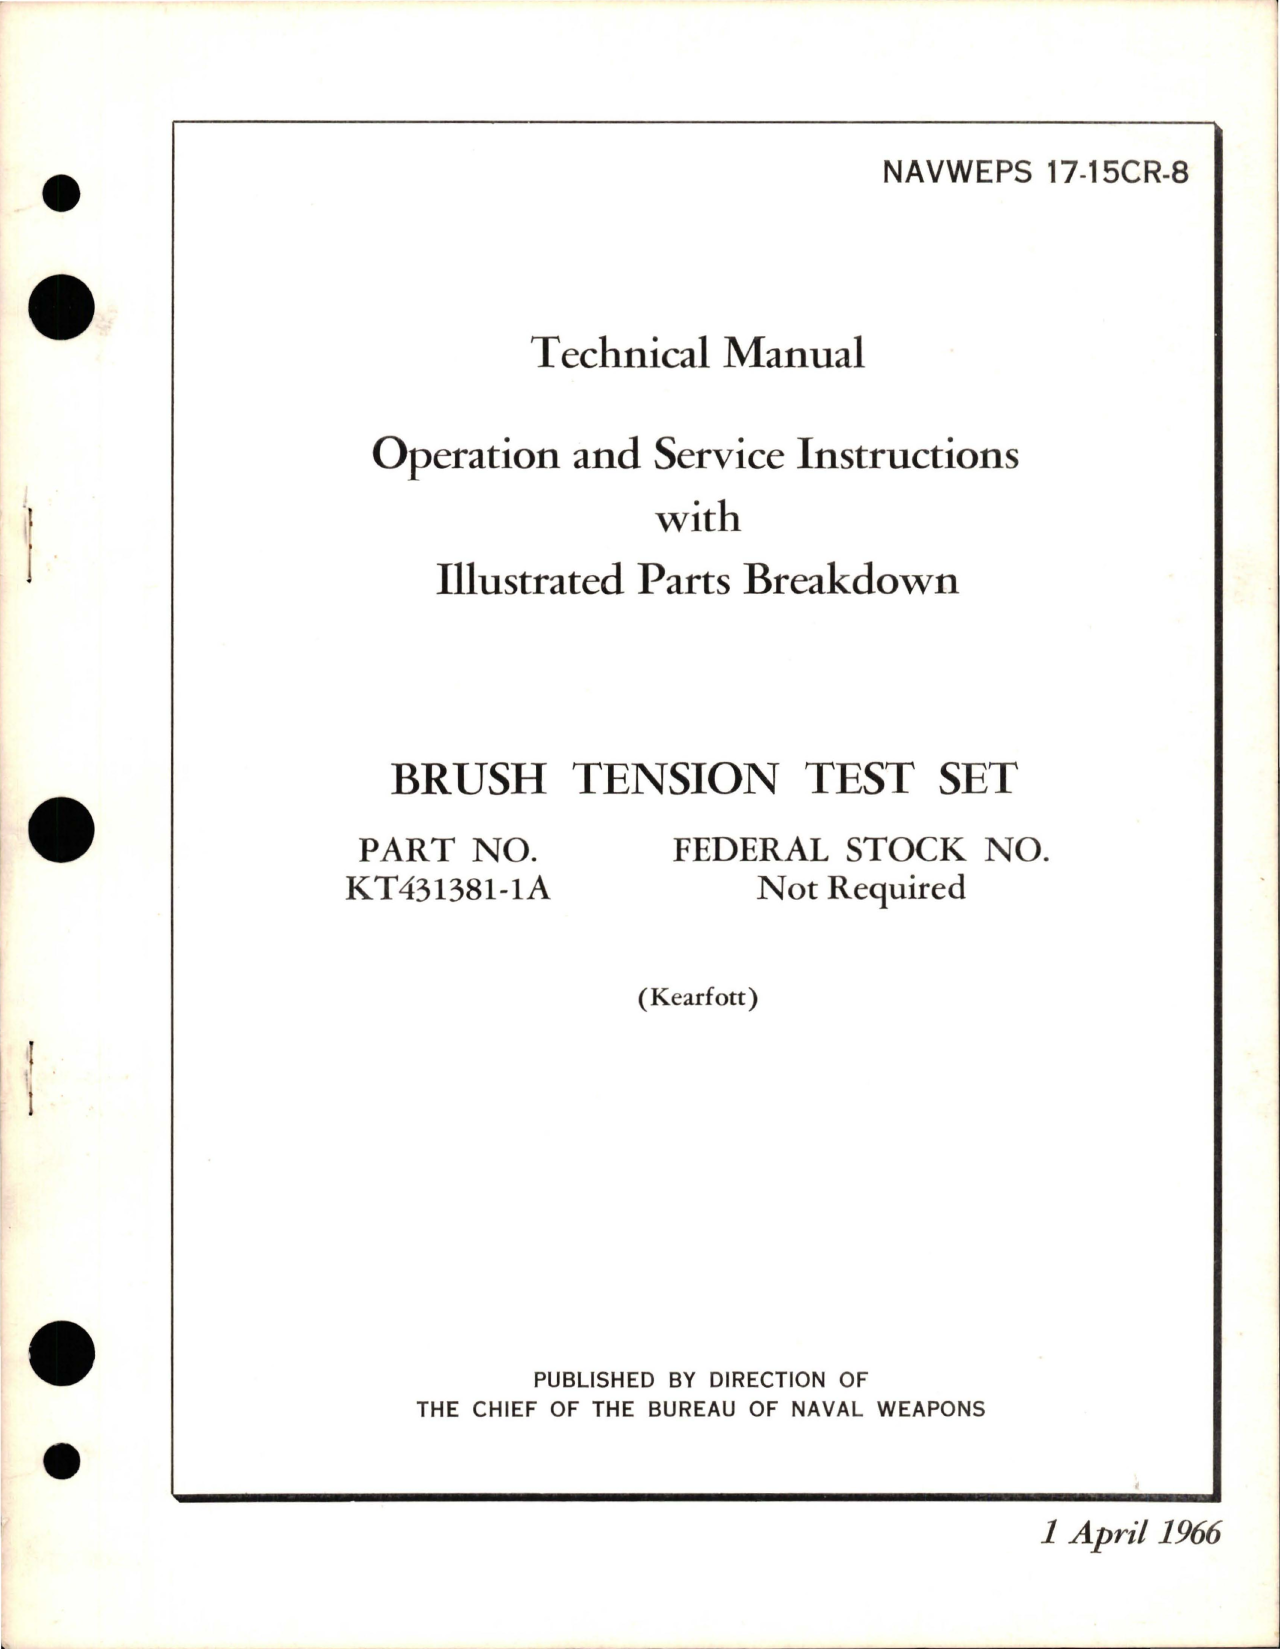 Sample page 1 from AirCorps Library document: Operation, Service Instructions and Illustrated Parts Breakdown for Brush Tension Test Set - Part KT431381-1A (Kearfott